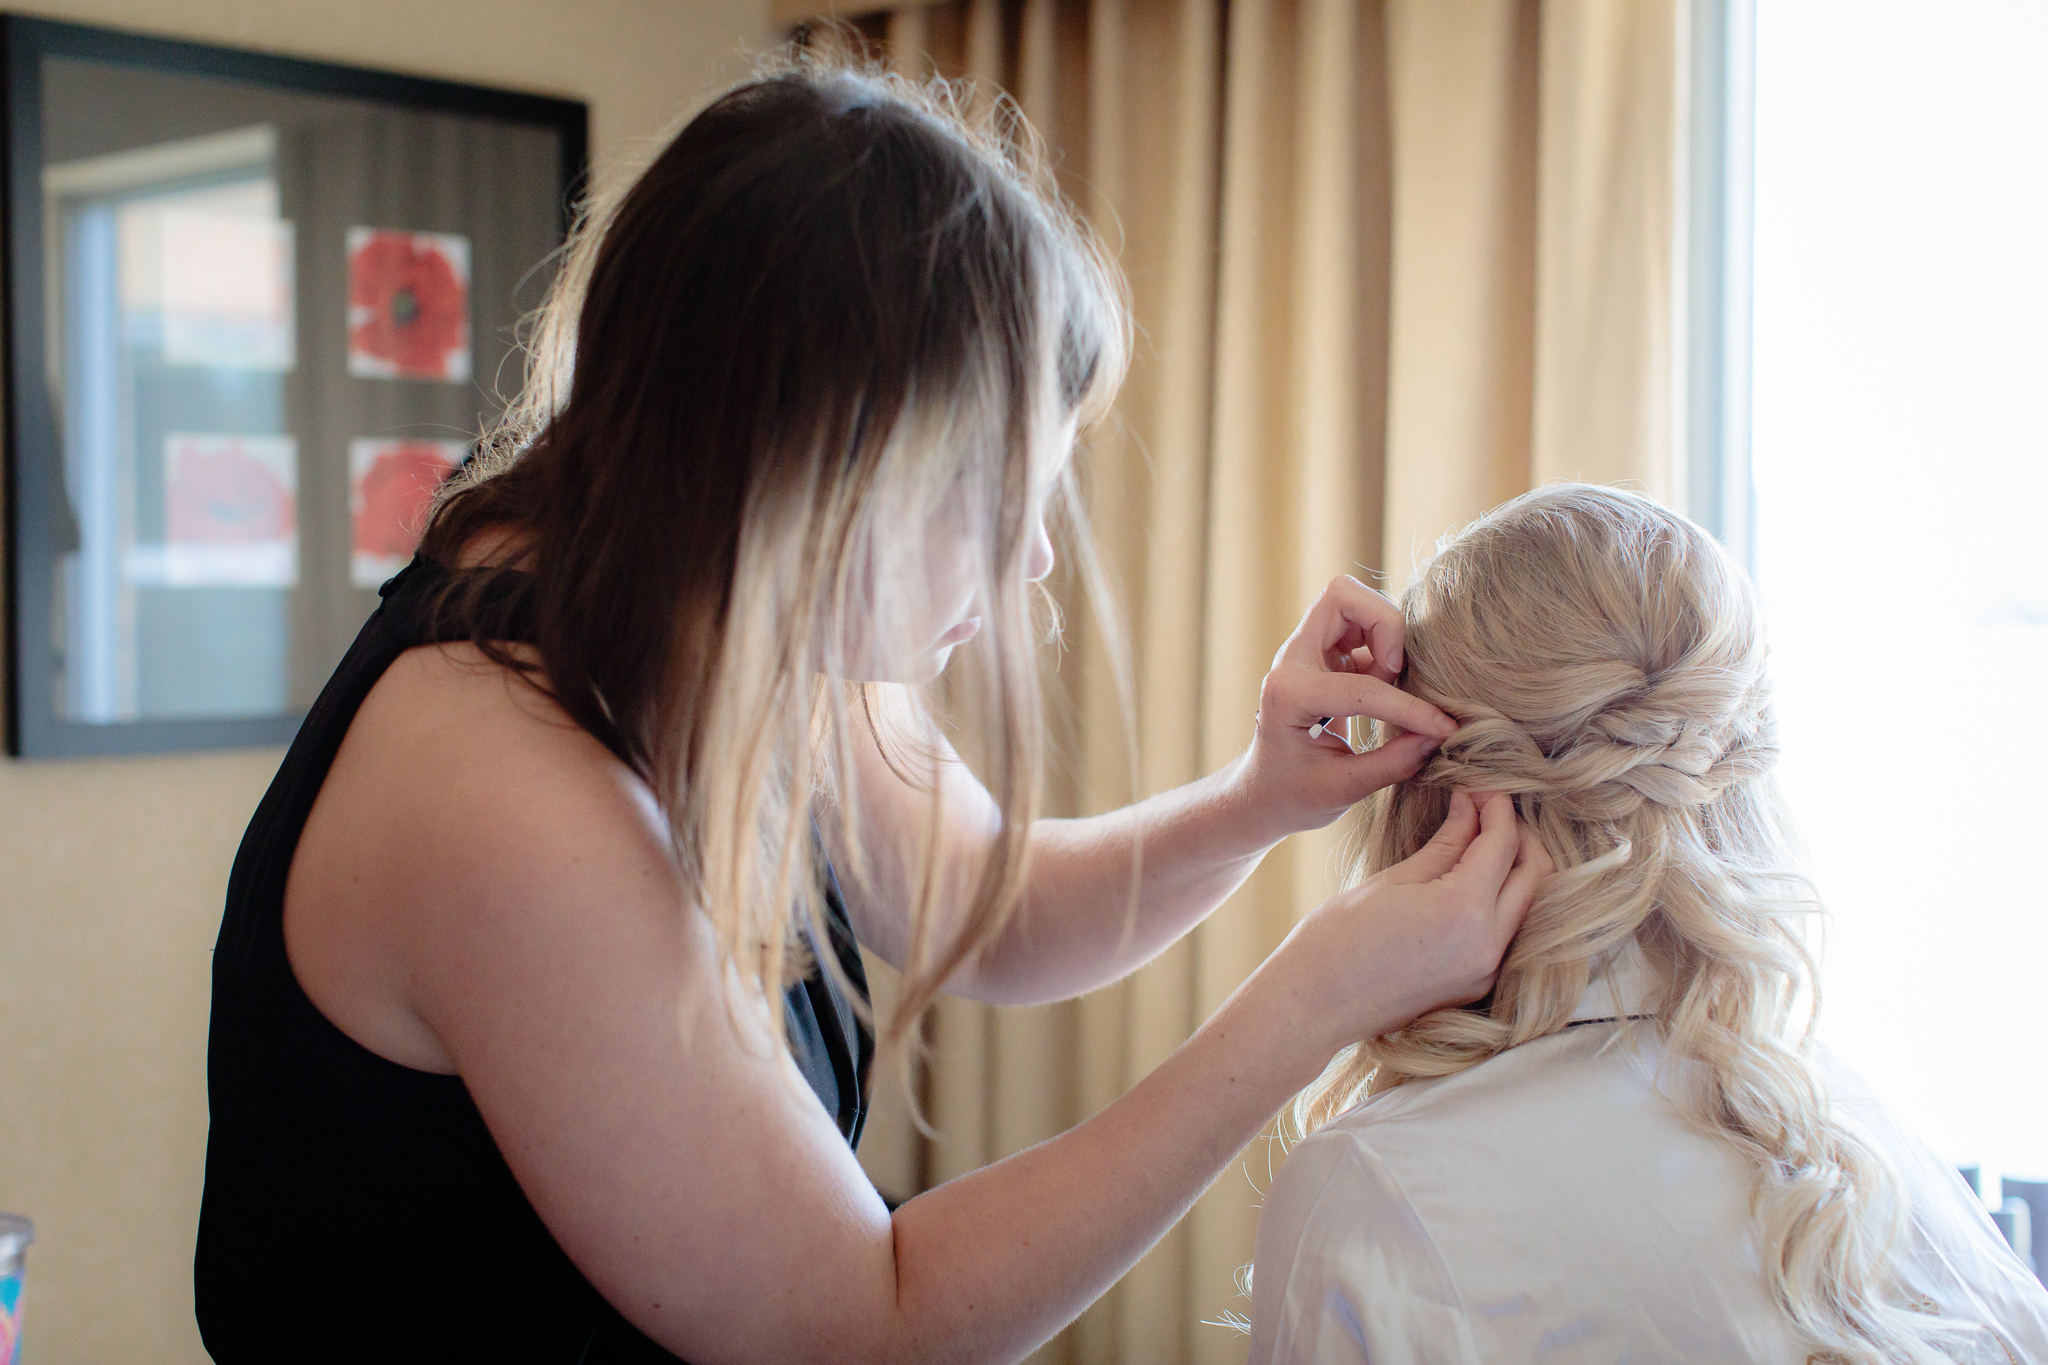 Stephanie Maust of Eye Do Makeup & Hair puts finishing touches on bride's hair